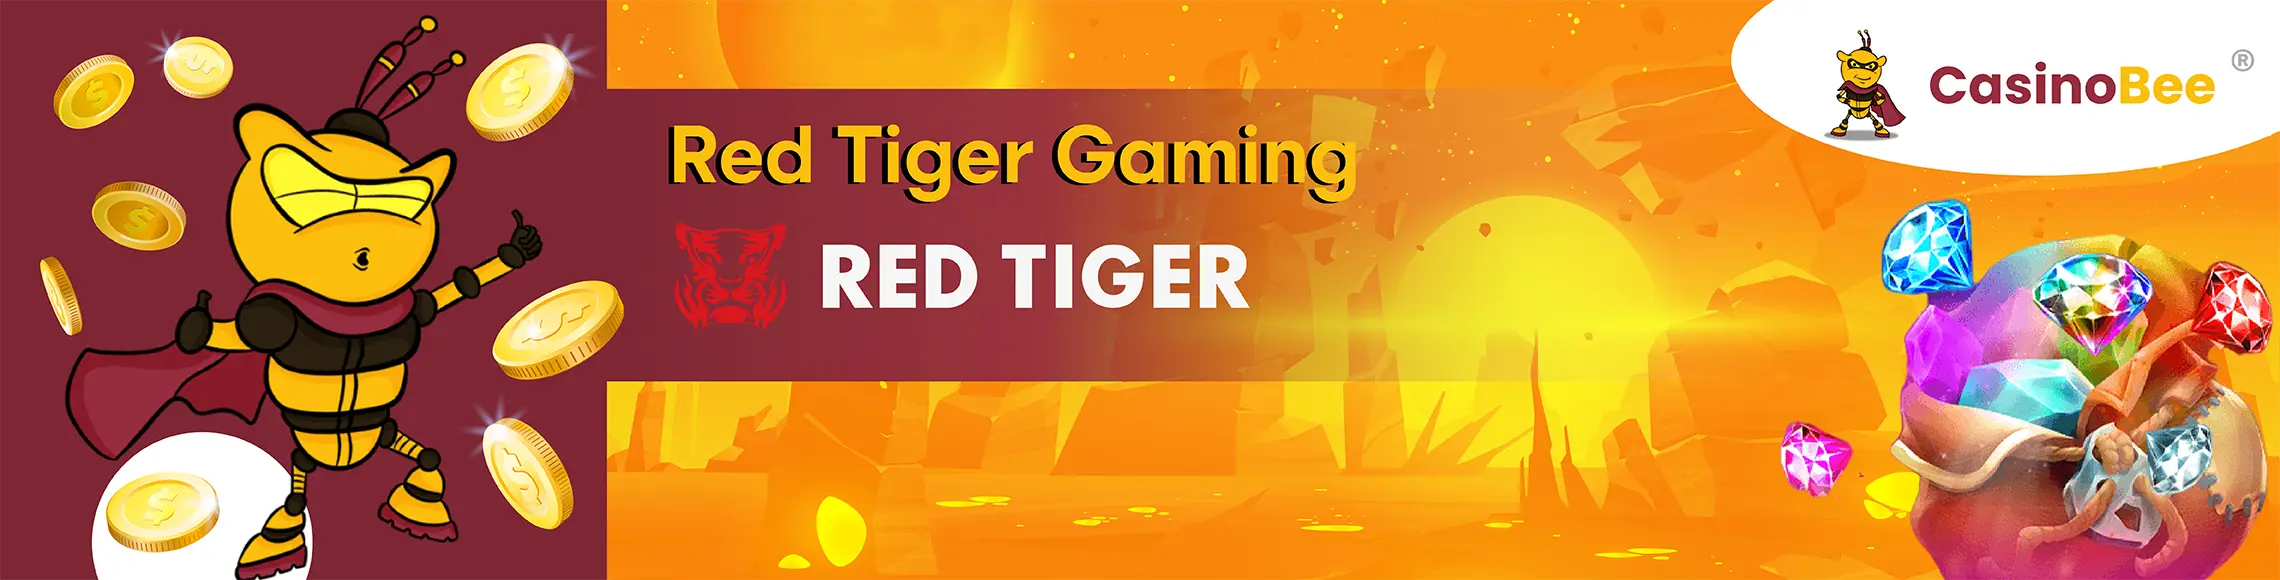 Red Tiger Gaming Spielautomaten
